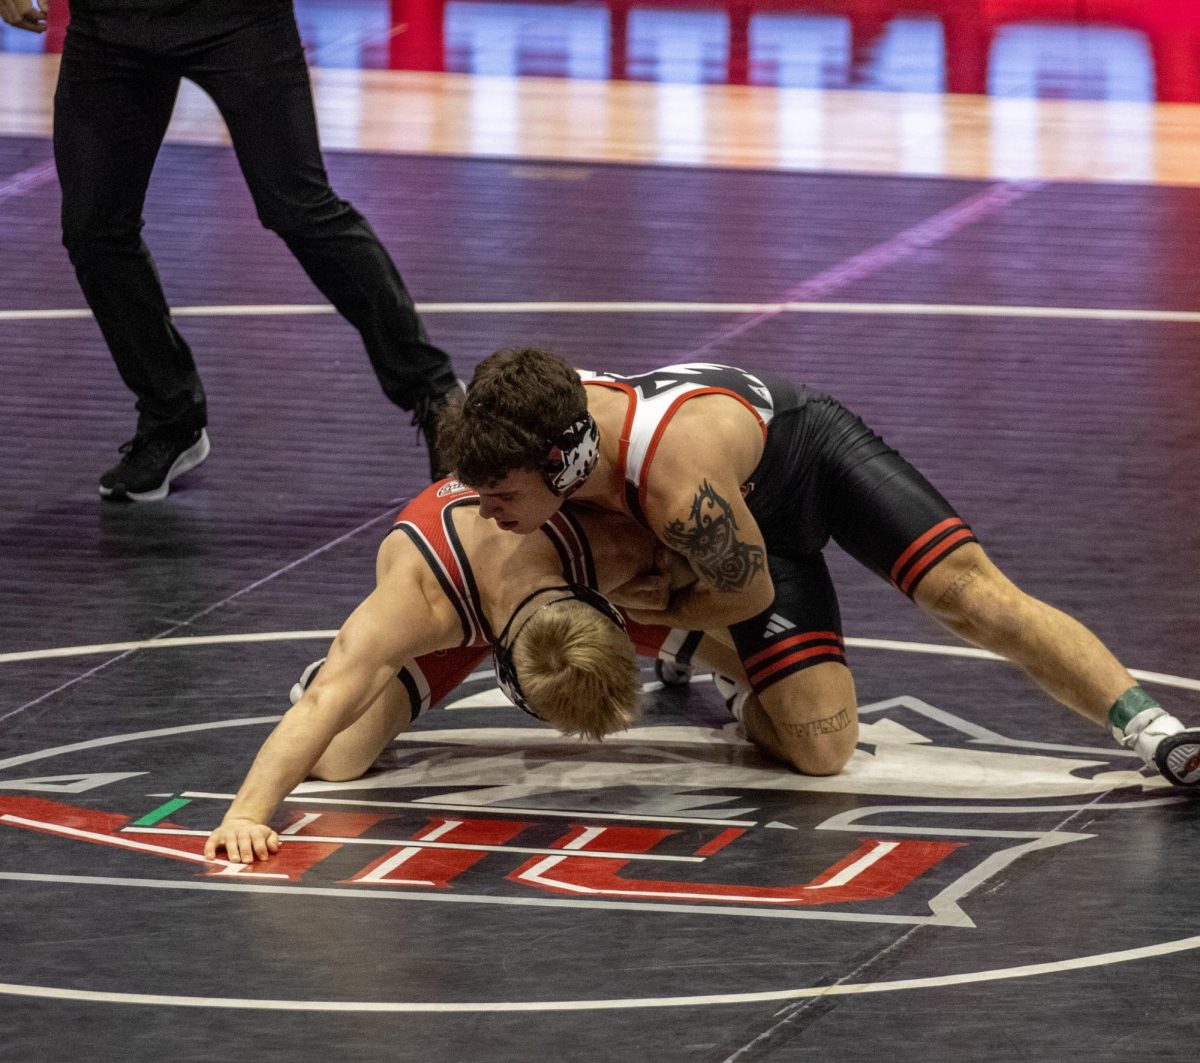 Redshirt freshman Danny Curran (right) grapples with redshirt freshman Dylan Gvillo (left) during the Huskie Duals exhibition last Friday. The Huskies first dual takes place Friday against Lindenwood and St. Ambrose. (Tim Dodge | Northern Star)